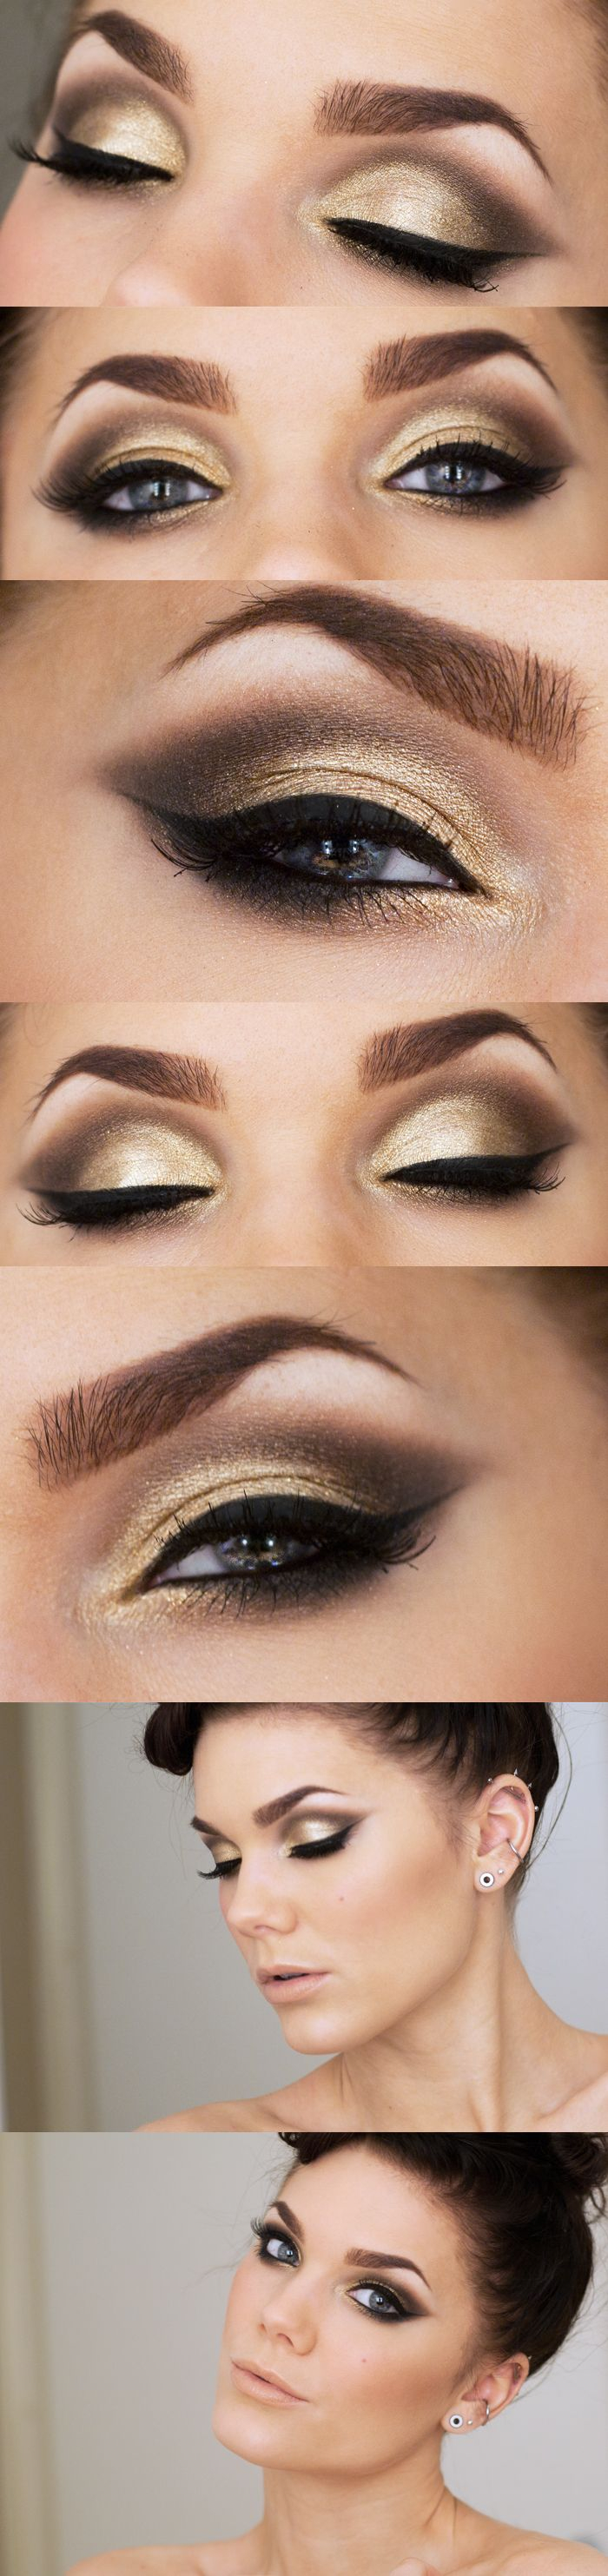 Gold And Black Eye Makeup Gold And Black Smokey Eye Tutorials Best Gold And Black Eye Shadow